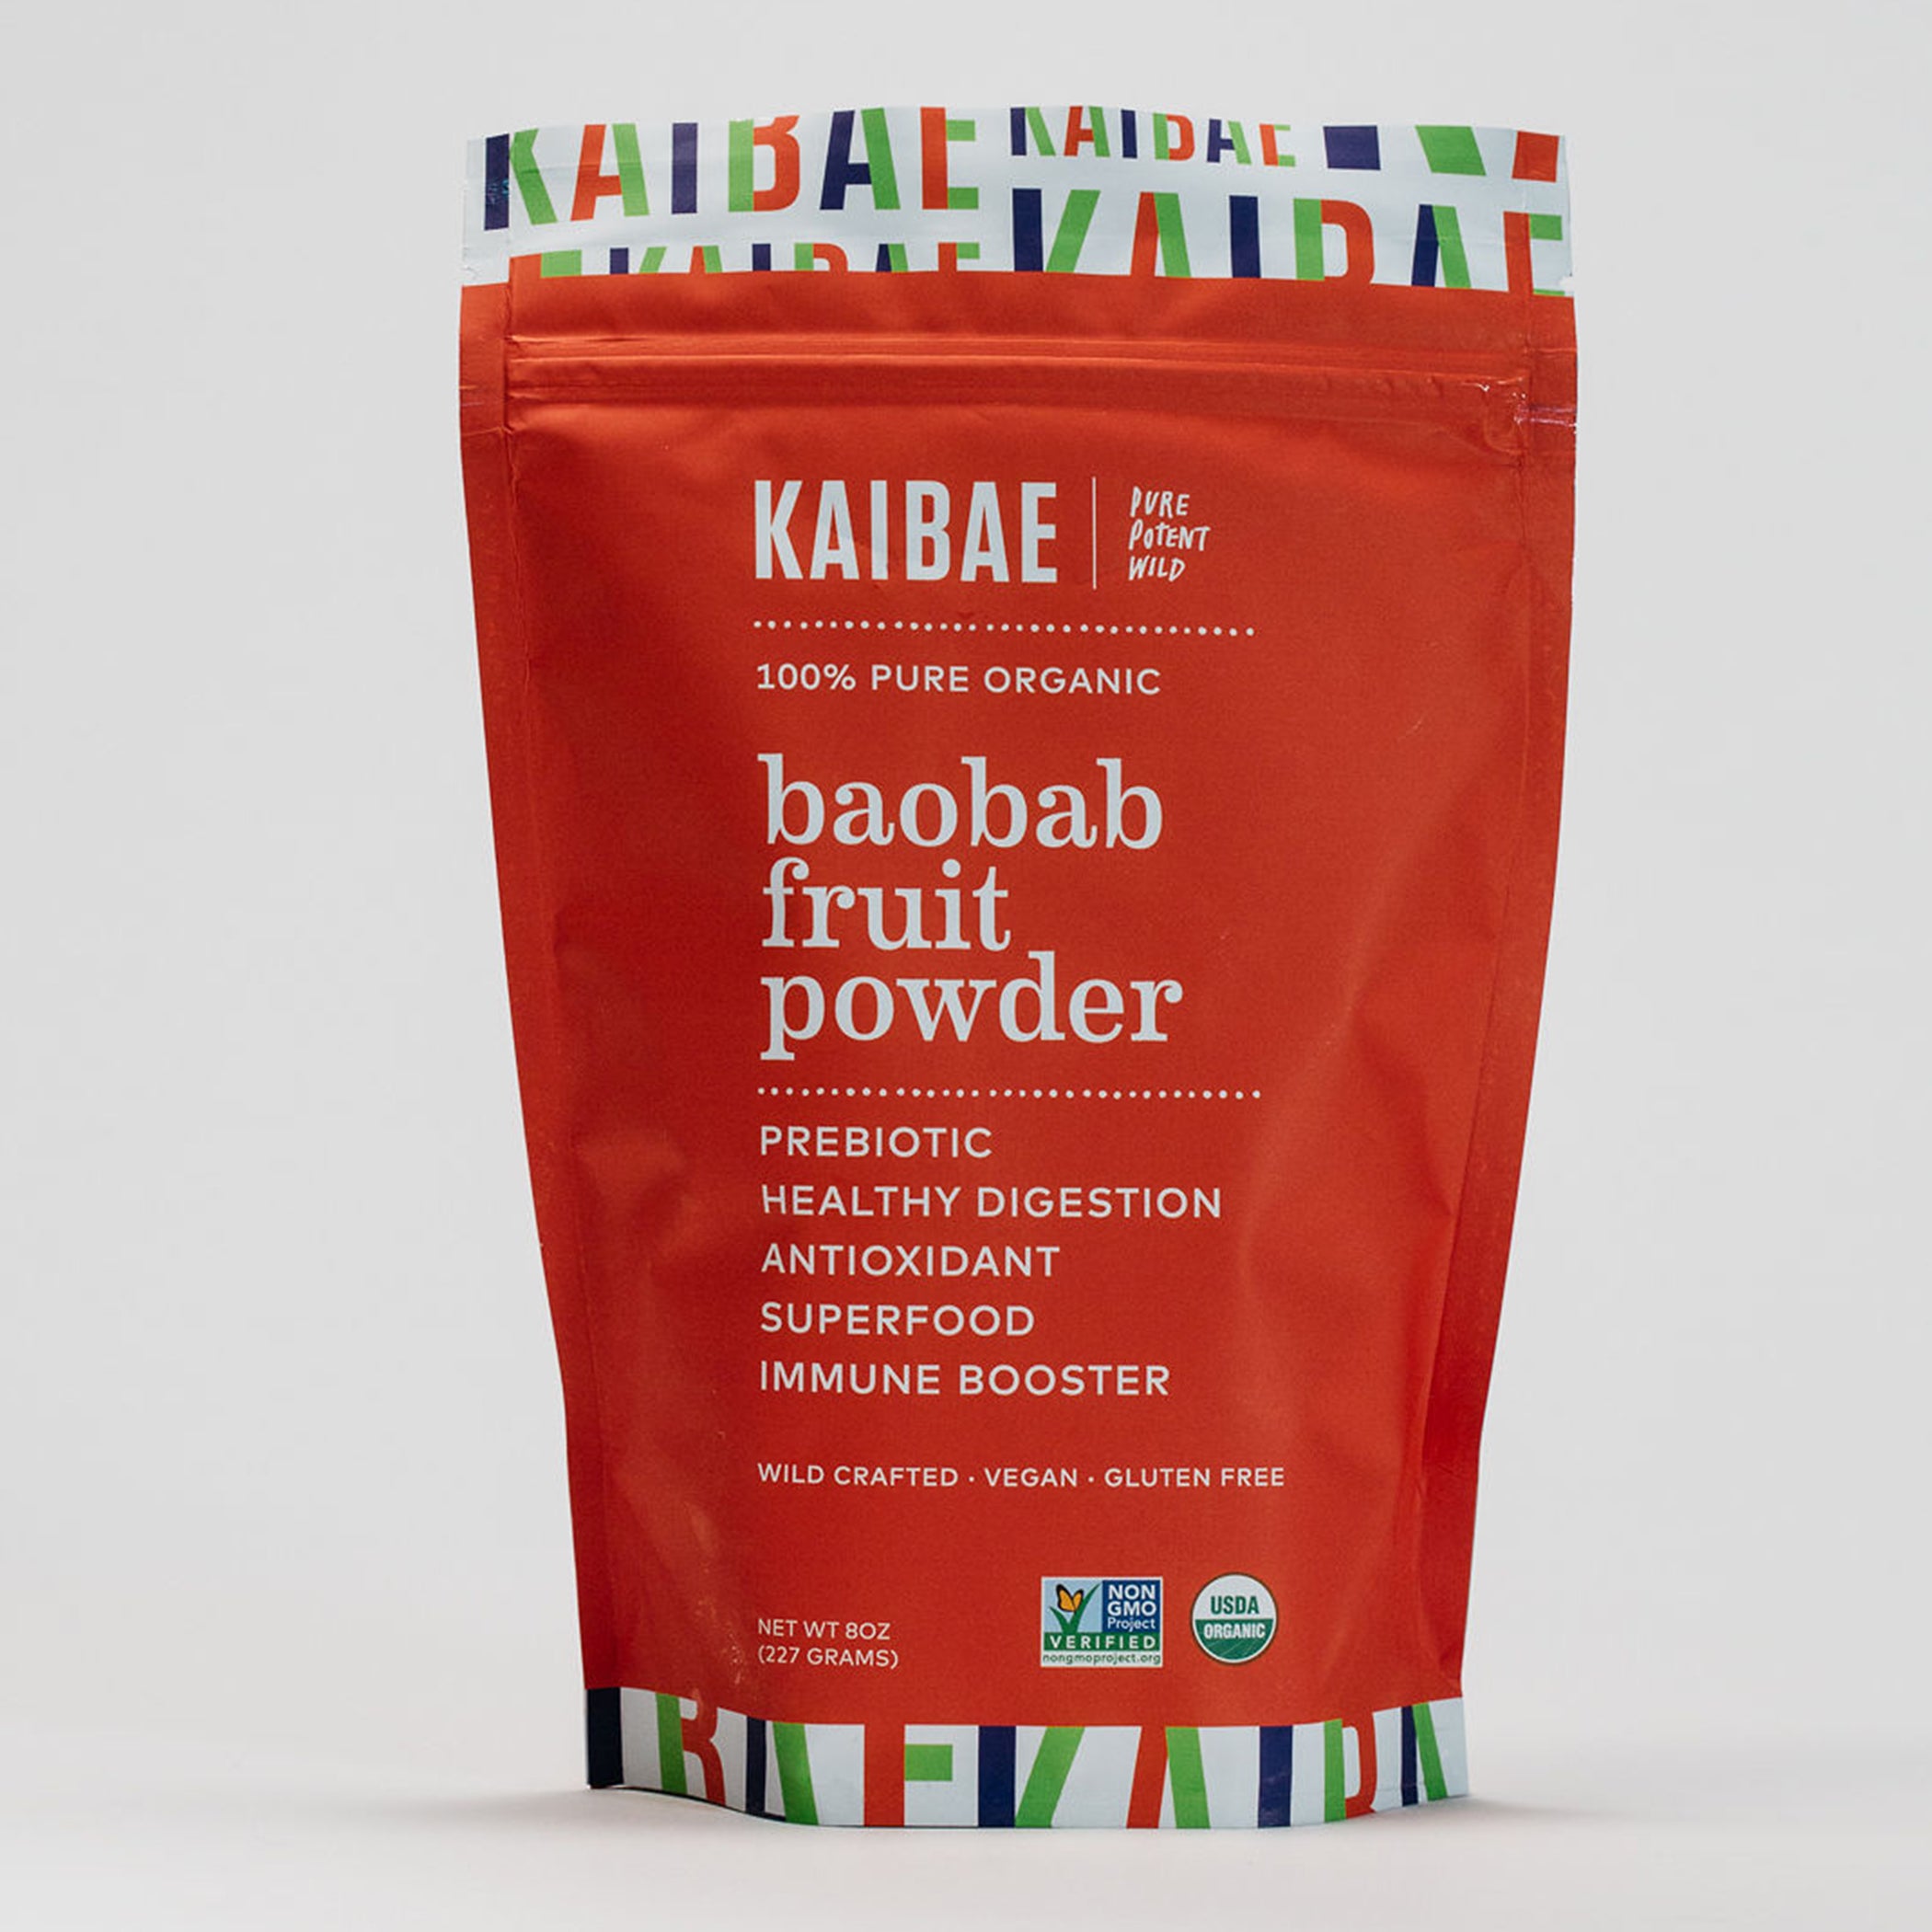 A red pouch of KAIBAE Baobab Powder stands against a white background. The packaging highlights it as 100% pure organic, prebiotic fiber, antioxidant, and vegan.